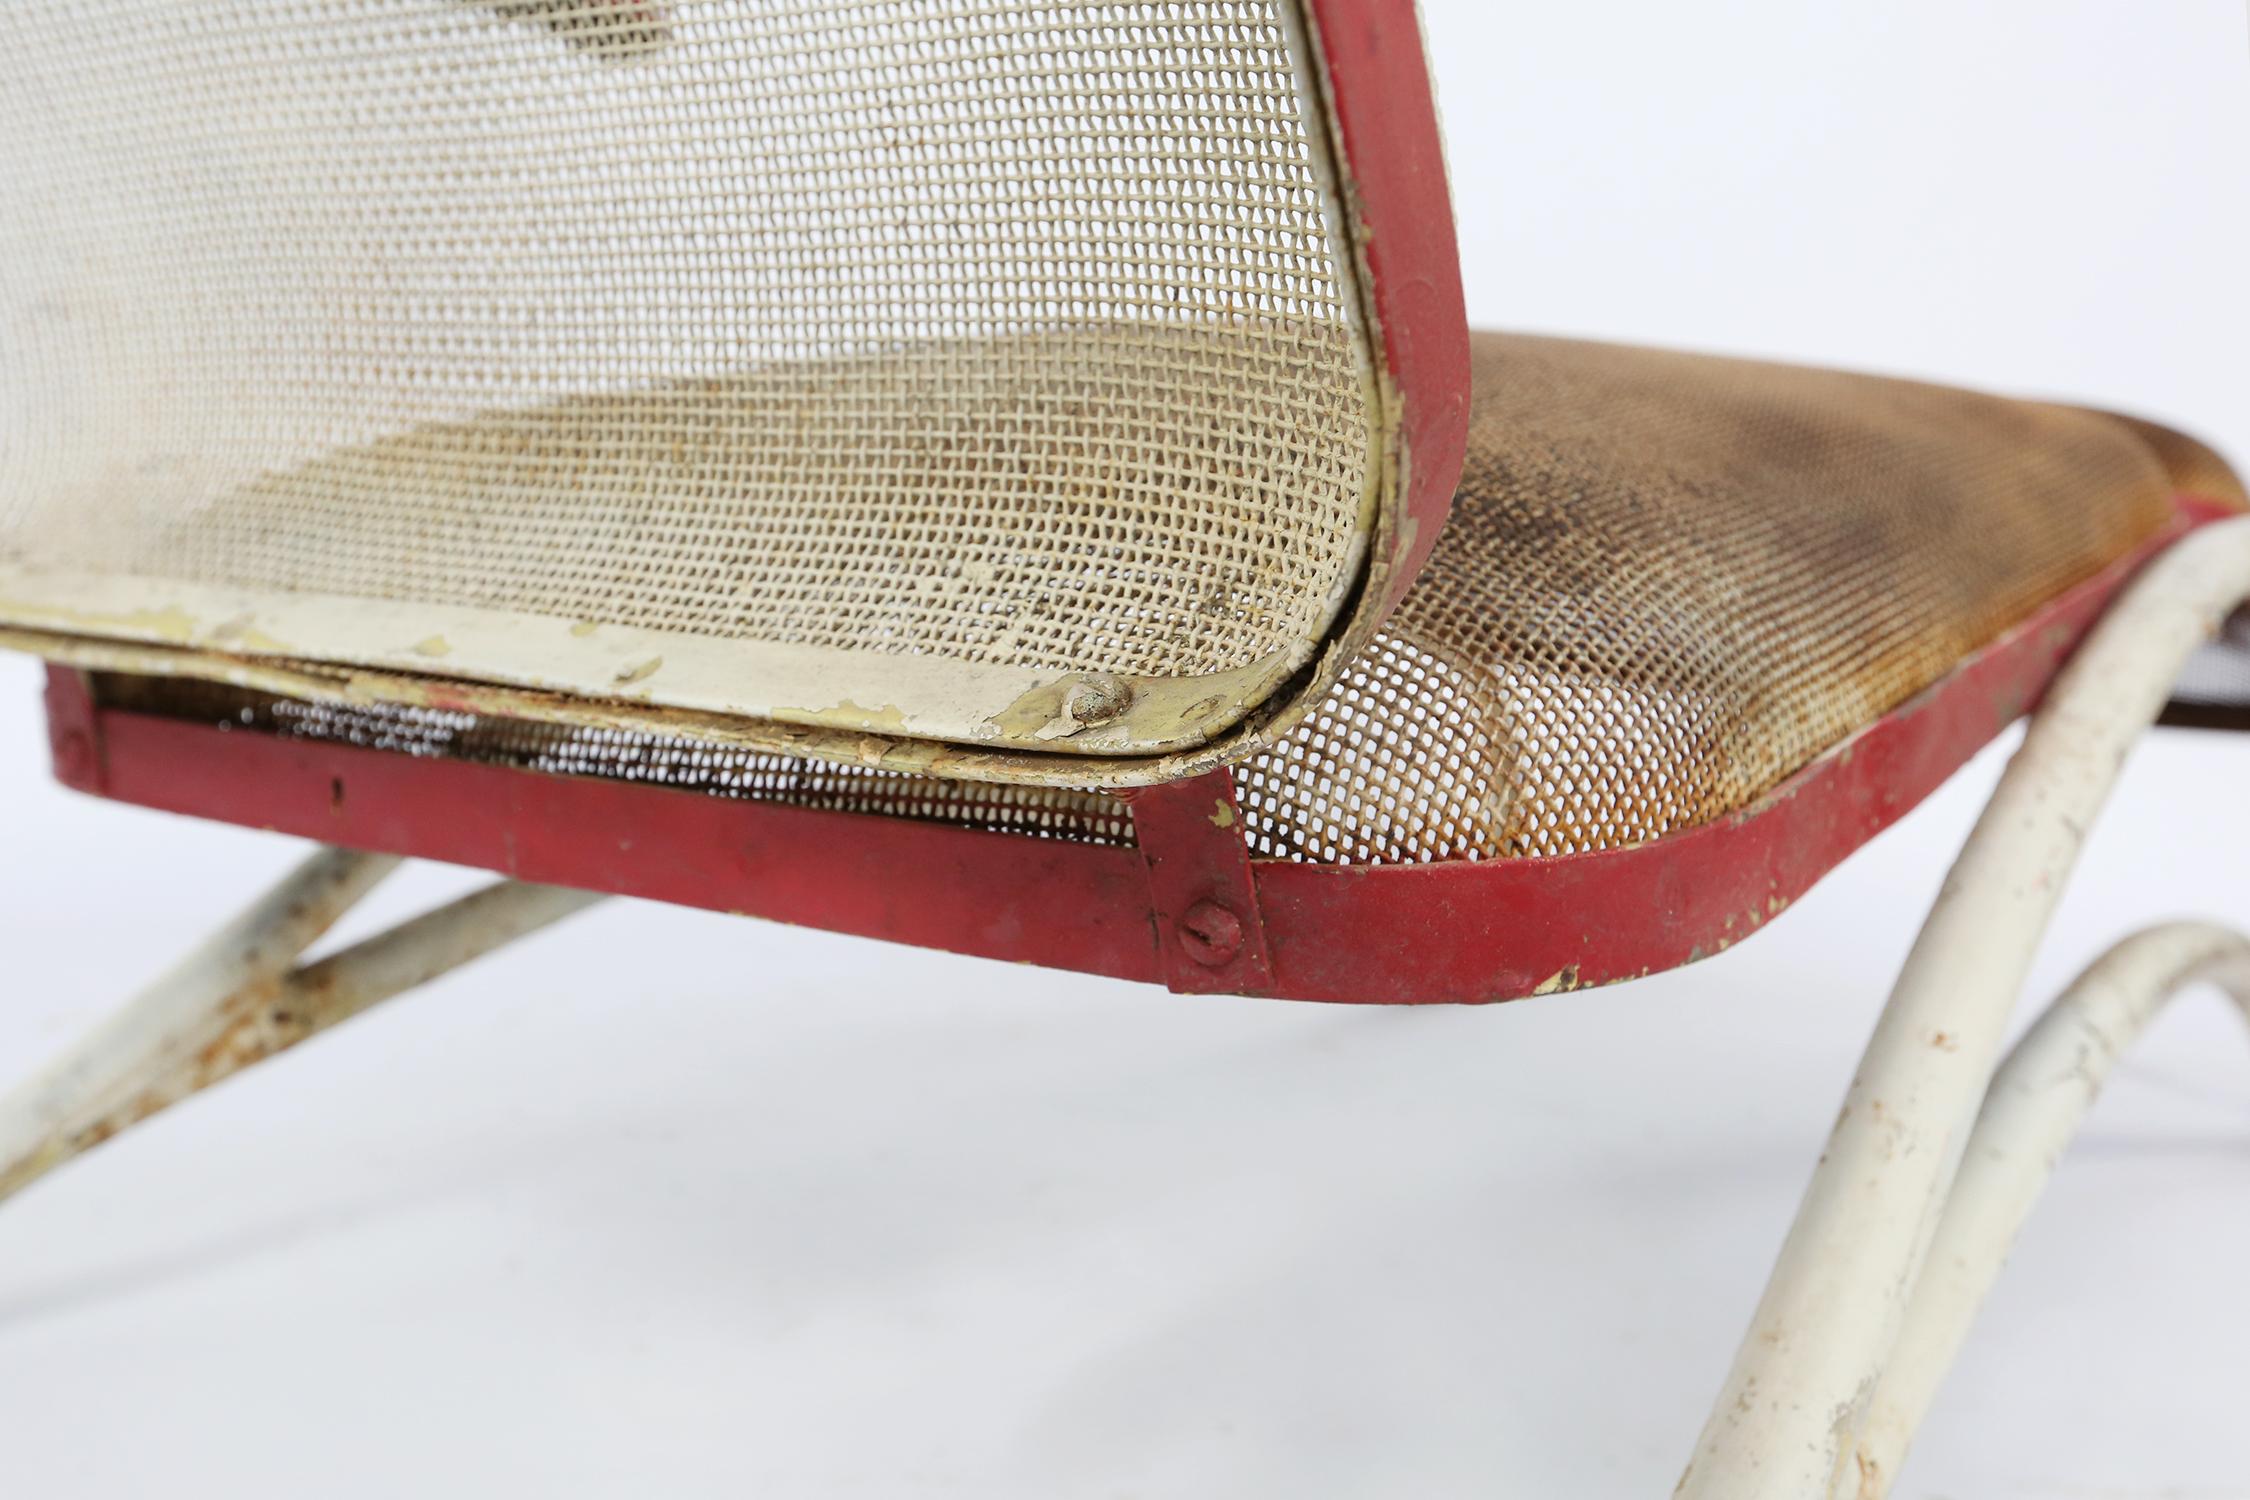 Modernist Metal Chaise Lounge or Lounge Chair, 1940s For Sale 2